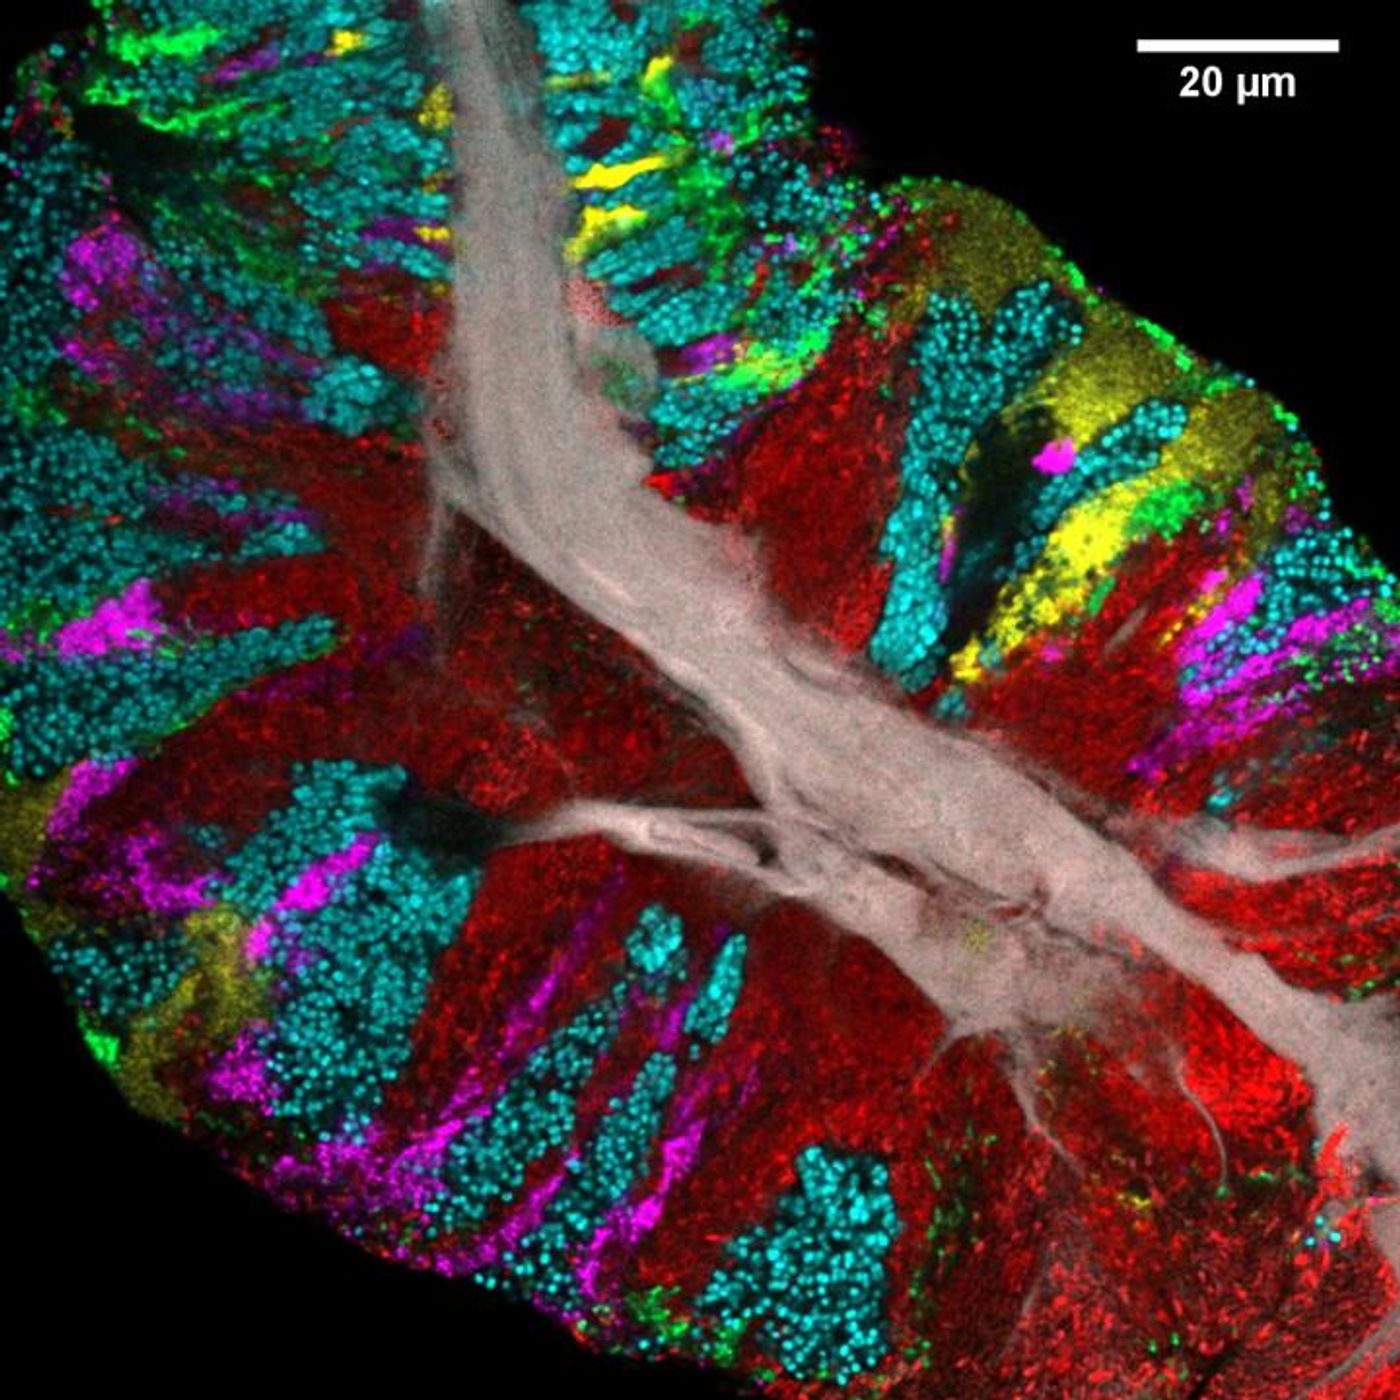 Bacterial biofilm scraped from the surface of the tongue and imaged using CLASI-FISH. Human epithelial tissue forms a central core (gray). Colors indicate different bacteria: Actinomyces (red) occupy a region close to the core; Streptococcus (green) is localized in an exterior crust and in stripes in the interior. Other taxa (Rothia, cyan; Neisseria, yellow; Veillonella, magenta) are present in clusters and stripes that suggest growth of the community outward from the central core./ Credit: Steven Wilbert and Gary Borisy, The Forsyth Institute